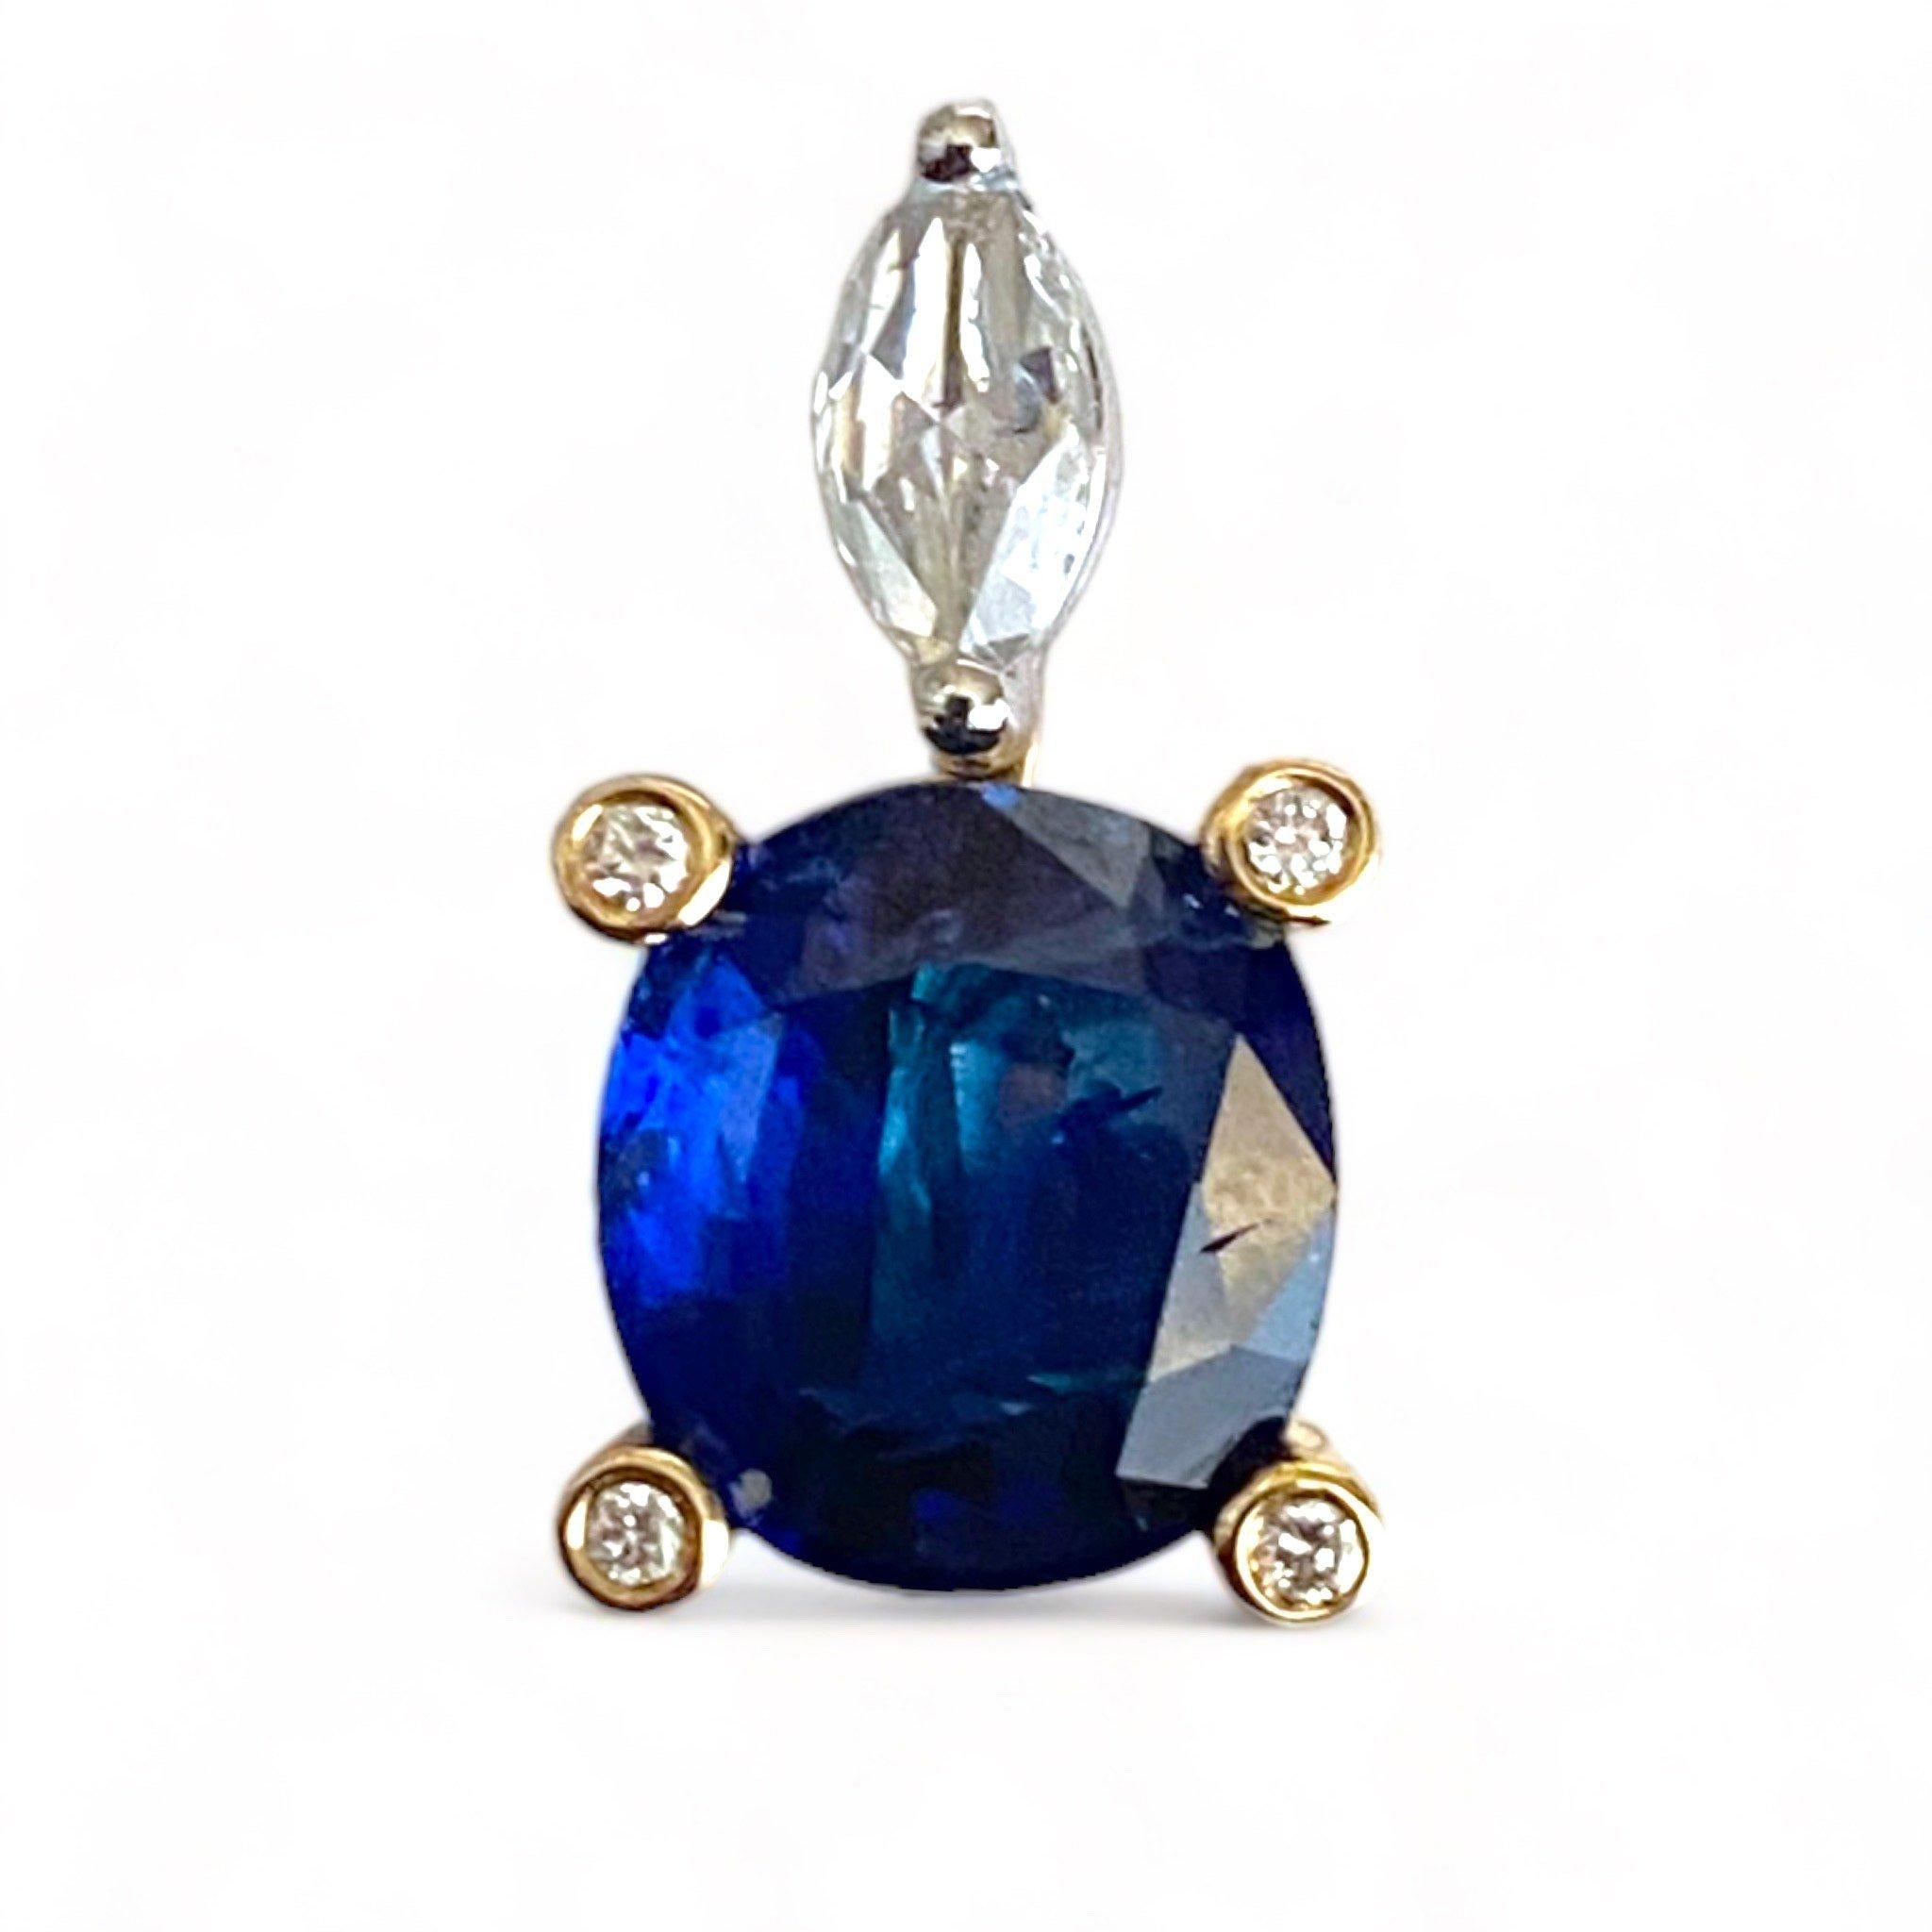 2 ct Blue Sapphire drop pendant with scintillating marquise shape rose cut solitaire and round diamonds on a solid gold 20 inch 14 k yellow gold link chain.

Pendant comes with chain.

Drop is approximately 15  mm x 8 mm